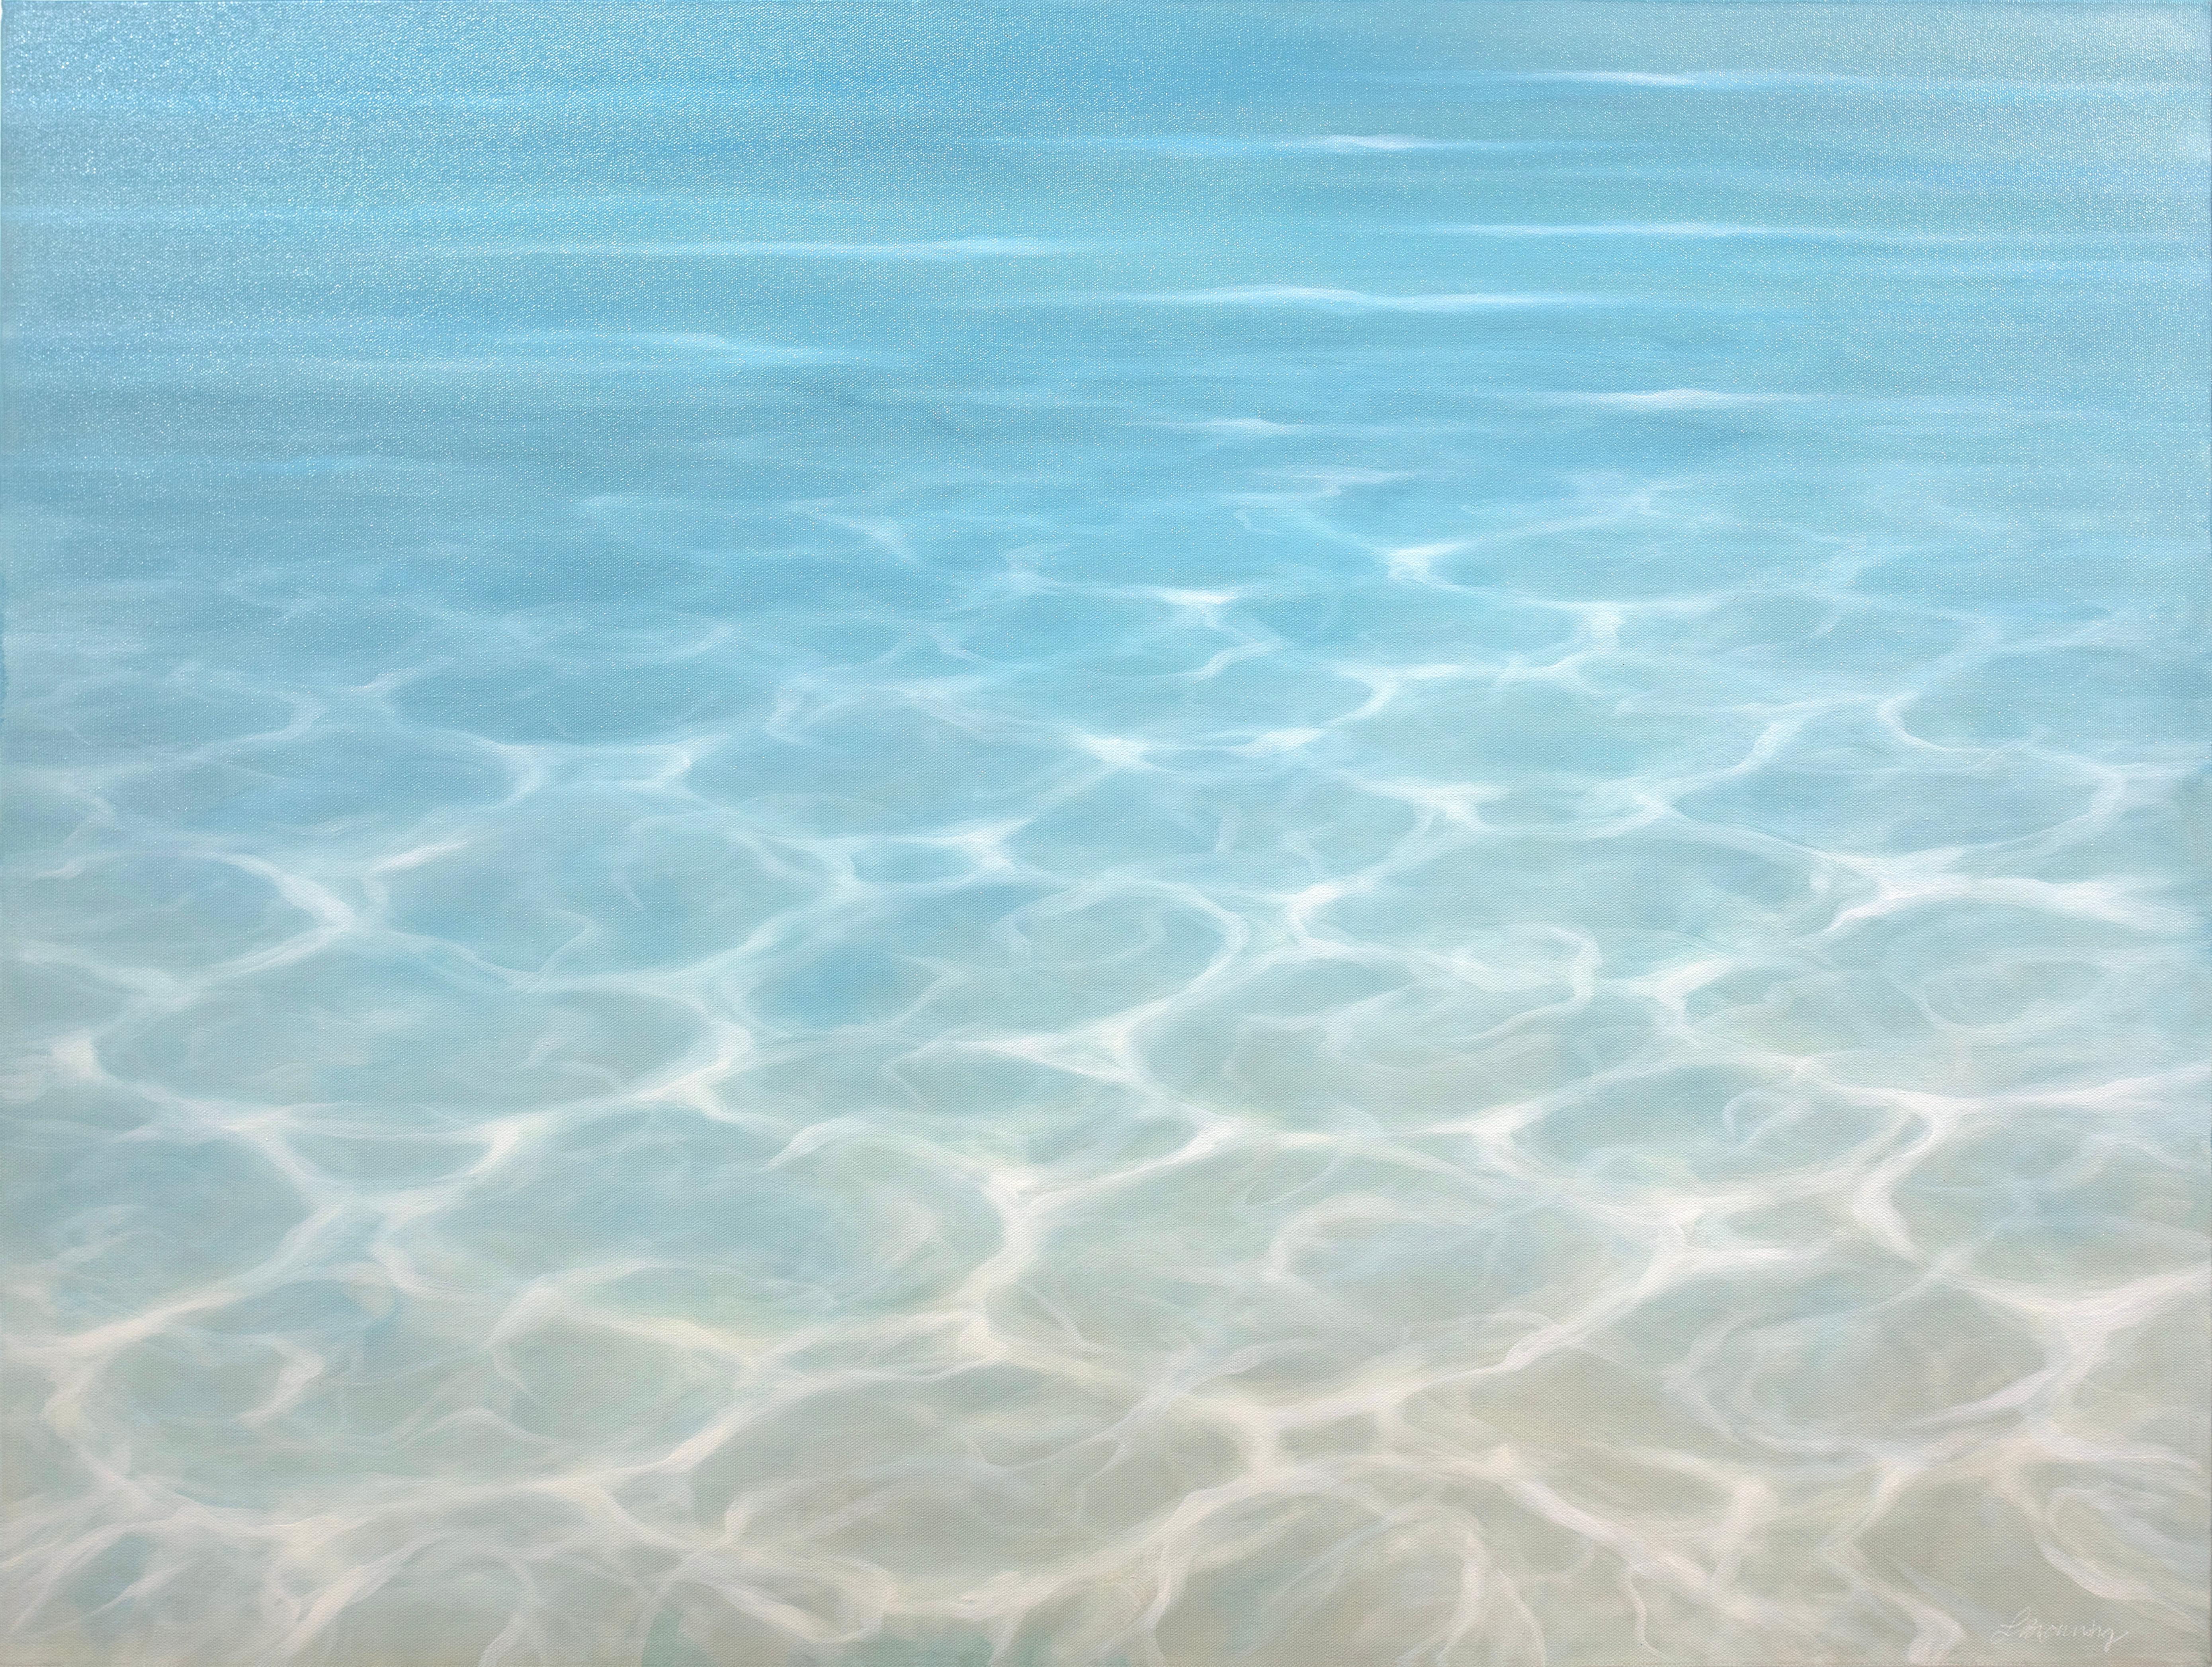 This representational blue coastal oil painting by artist Laura Browning features a close-up cropped view of the surface of open water, with light reflecting across it. The palette features a light, sandy undertone in the foreground that fades to